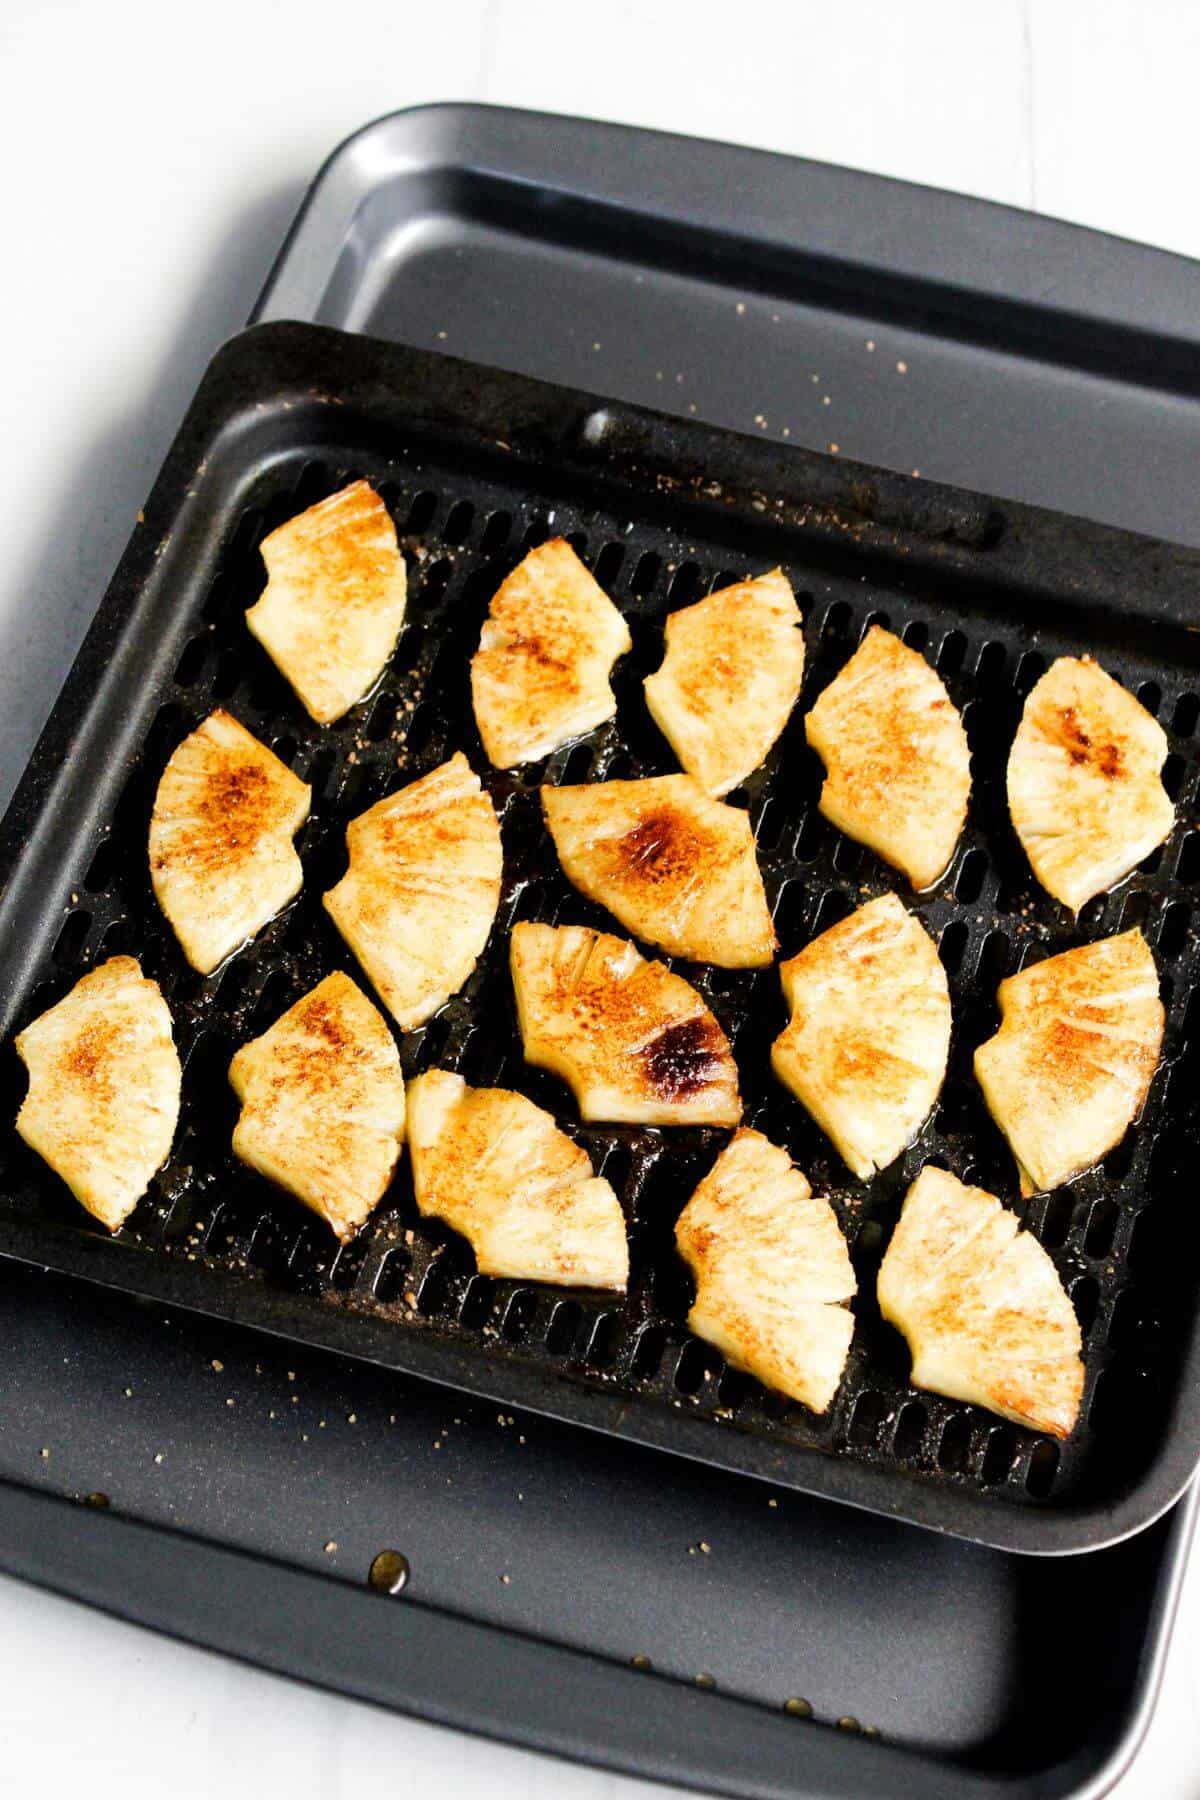 Grilled pineapple slices on an air fryer tray.